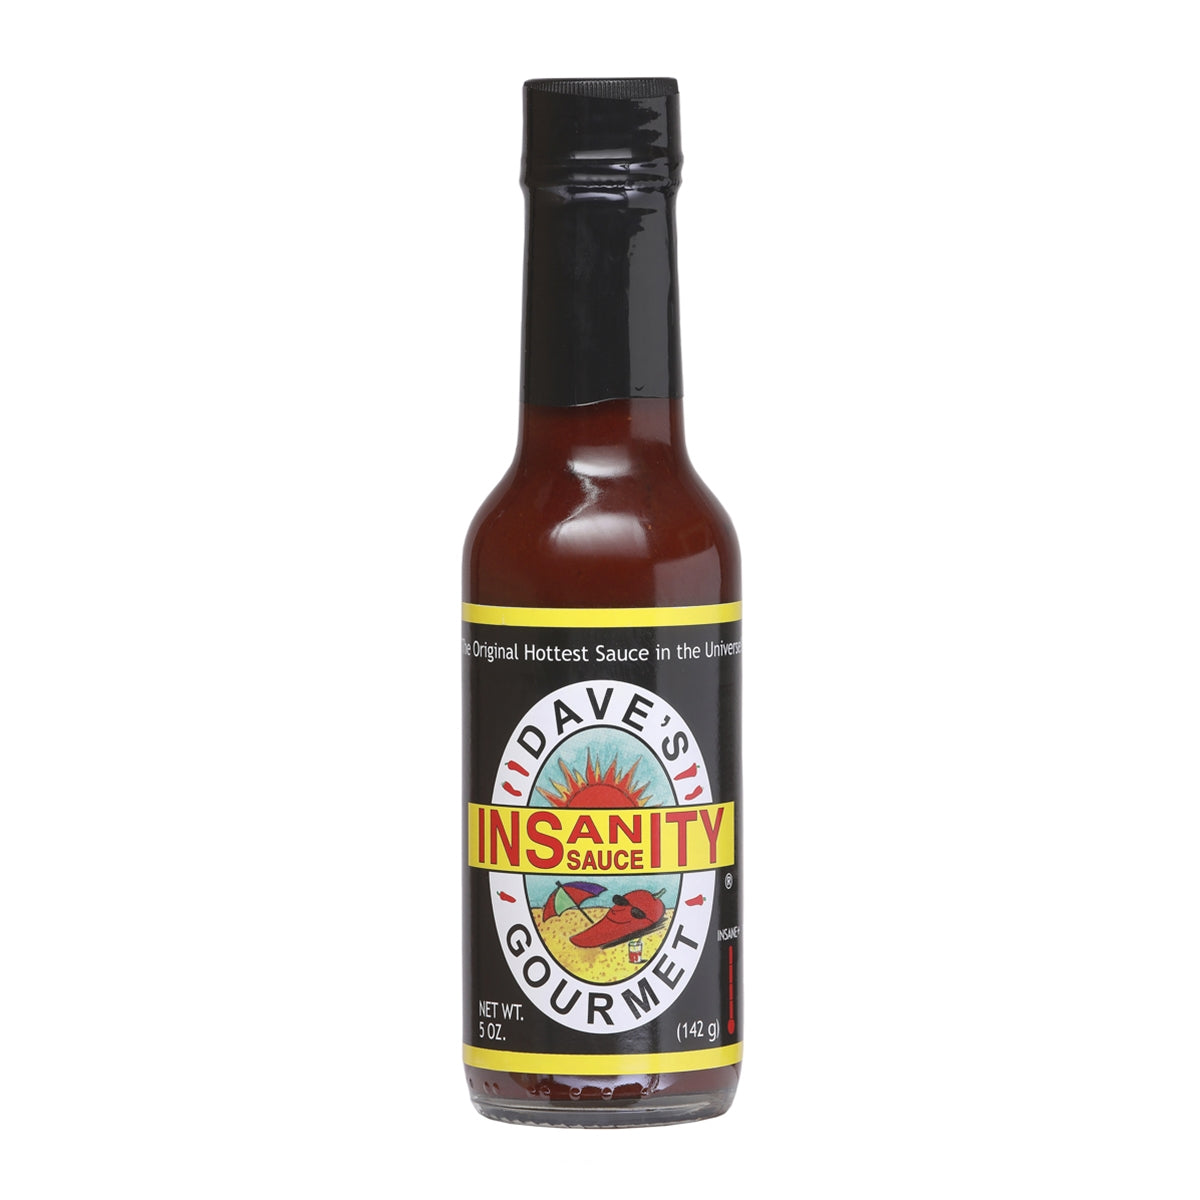 Hot Sauce Daves Gourmet Insanity 5 oz The Original Hottest Sauce in the Universe Heat 10+++Extract